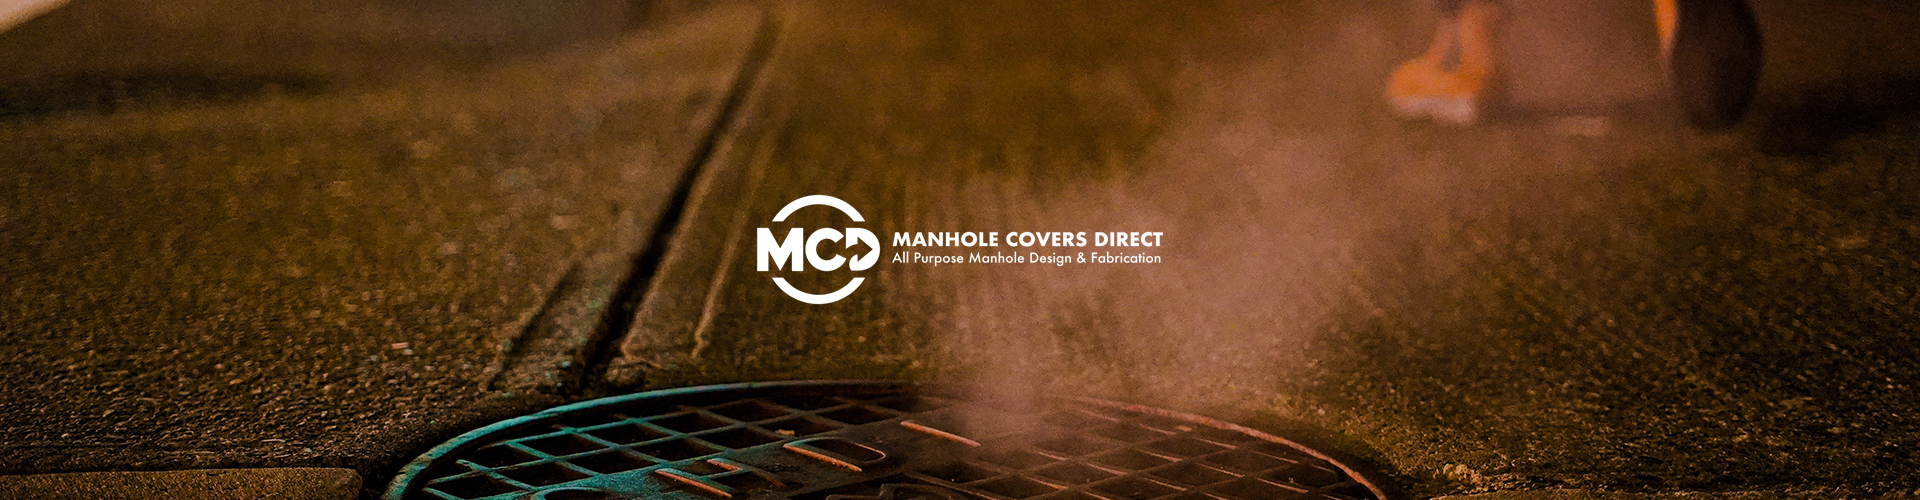 Manhole Covers Direct banner